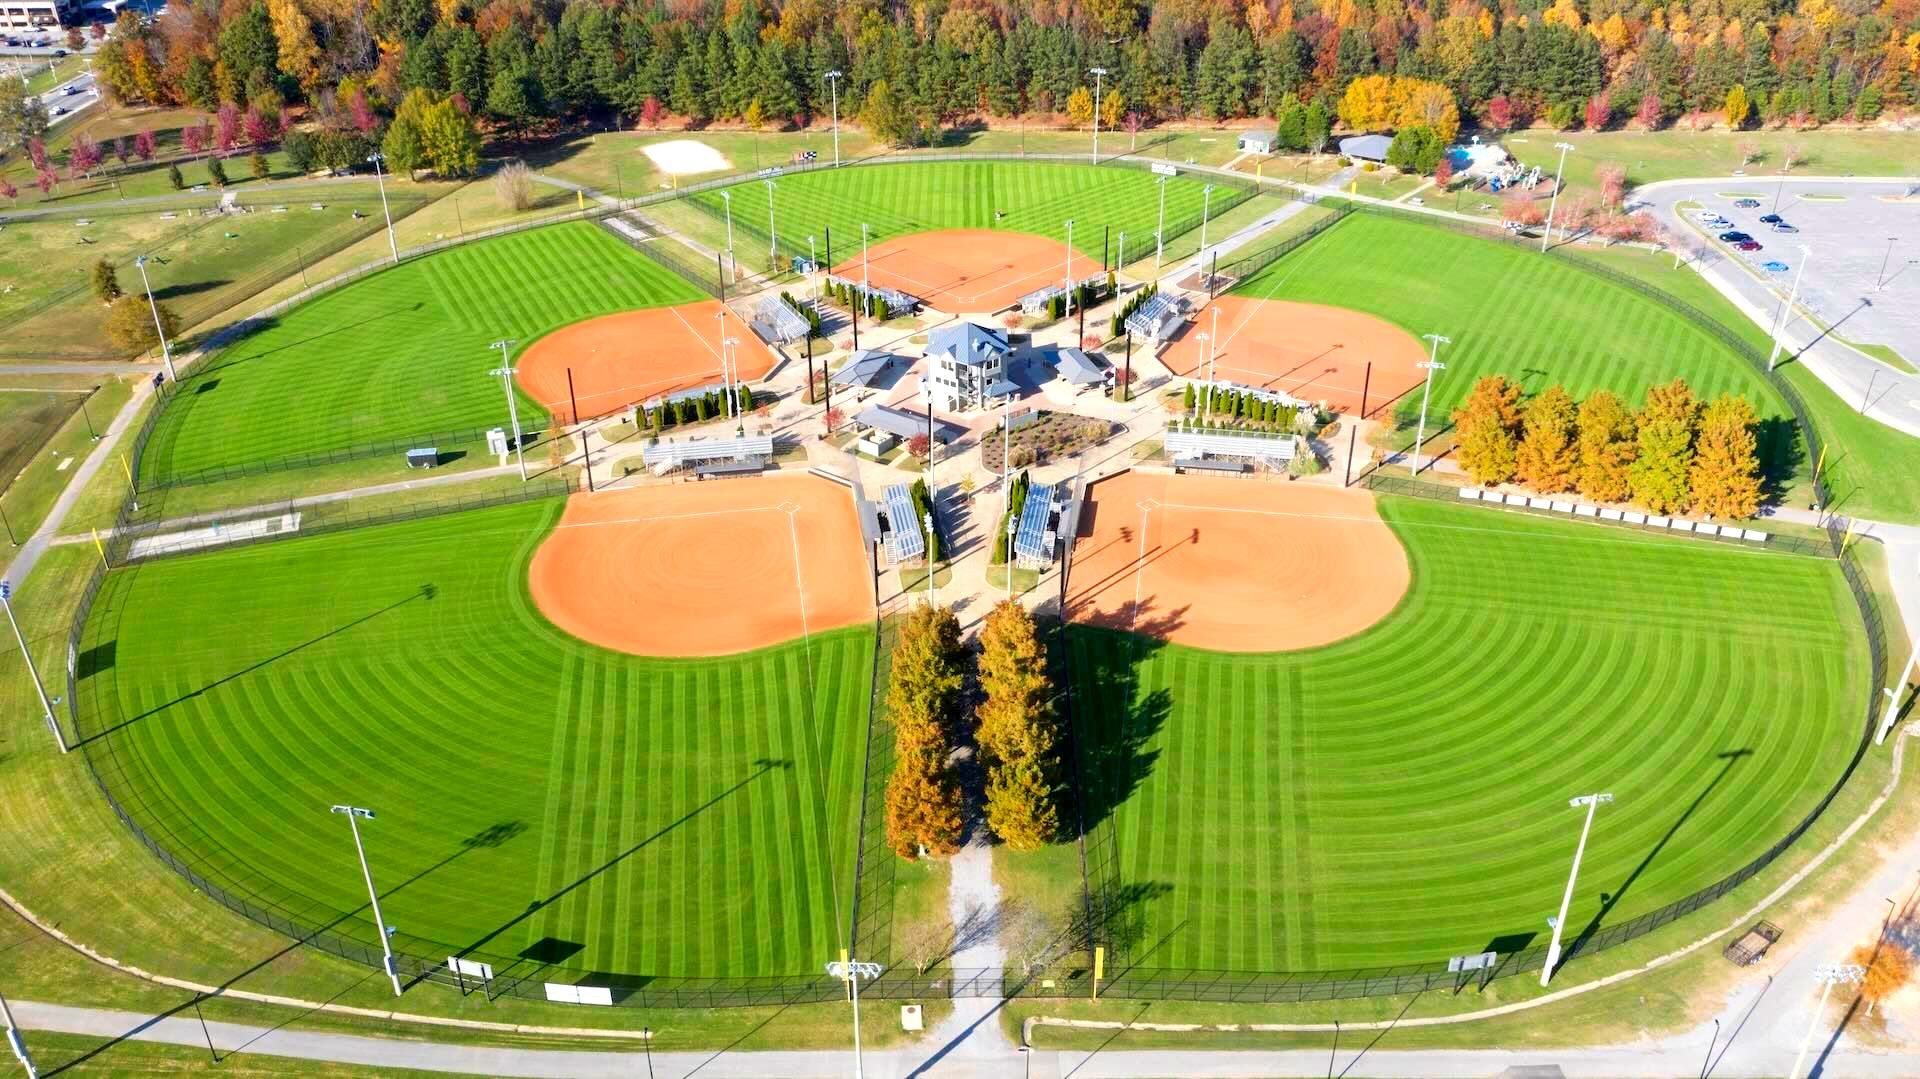 An overview photo of the Heritage Park Baseball and Softball fields